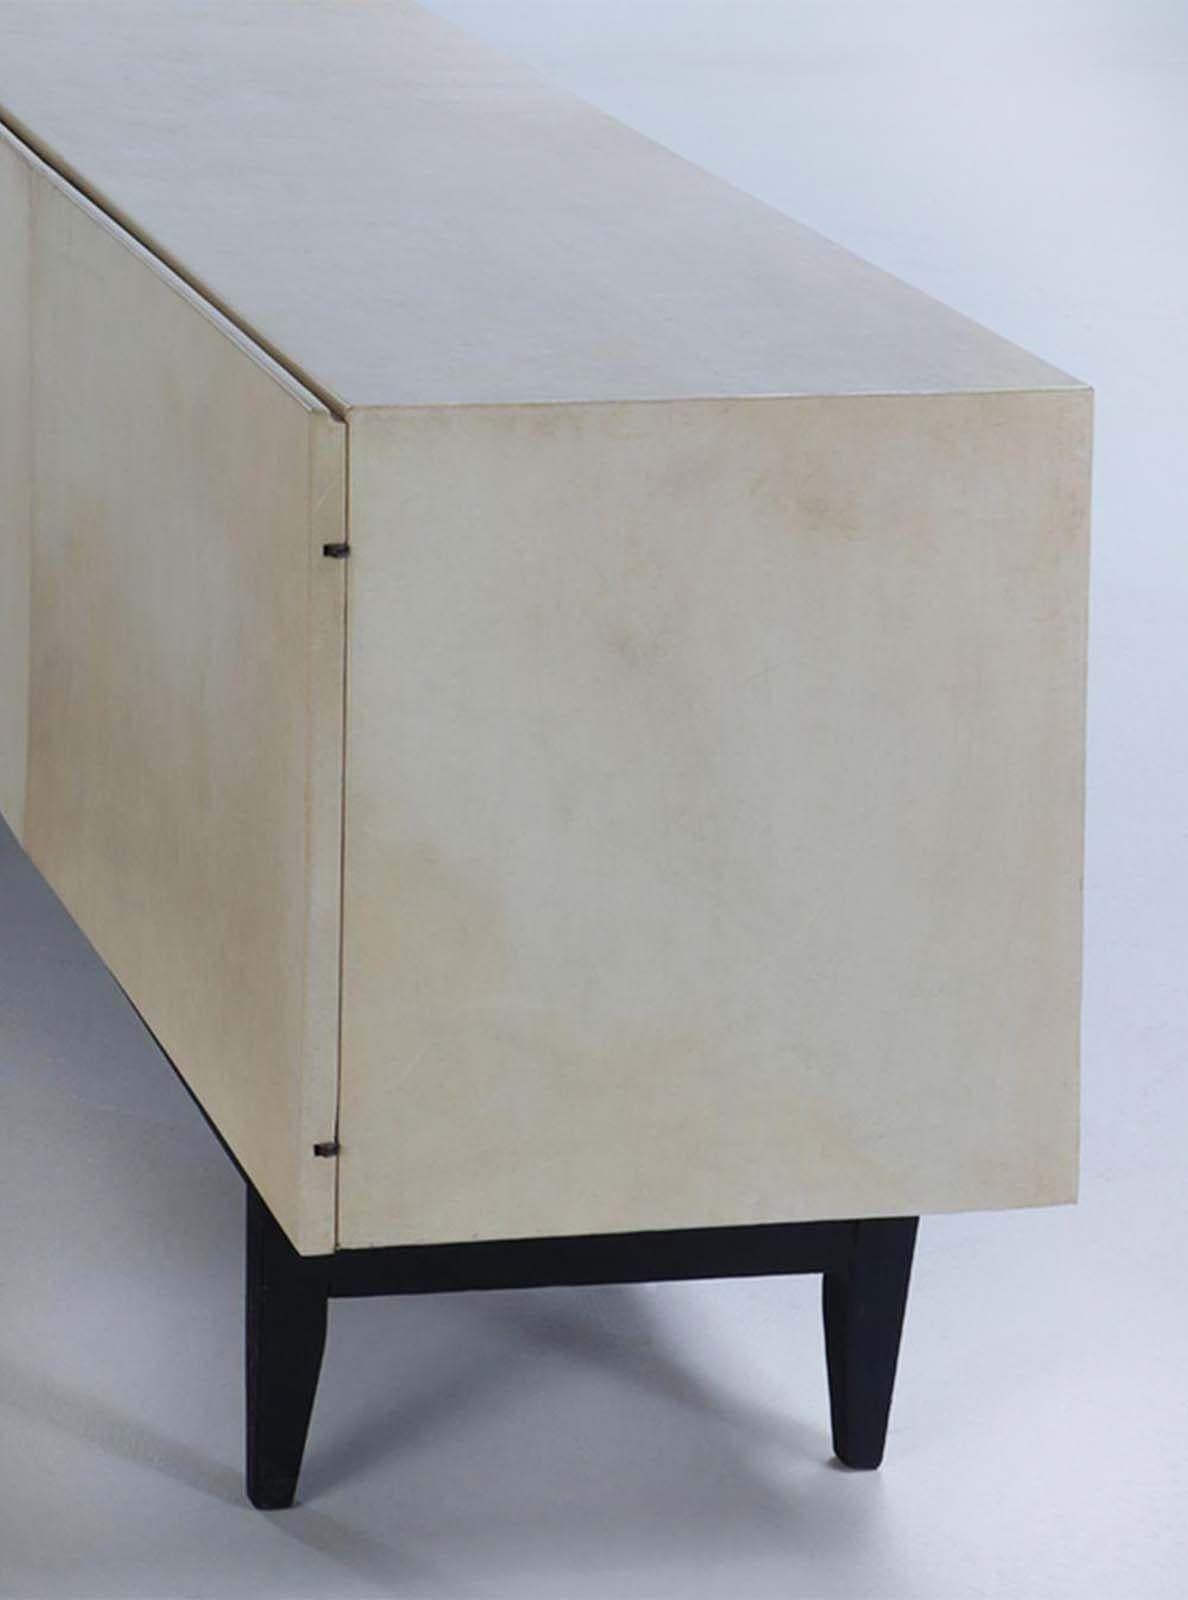 American Mid-Century Sideboard in Parchment with Ebonized Base, c. 1960's For Sale